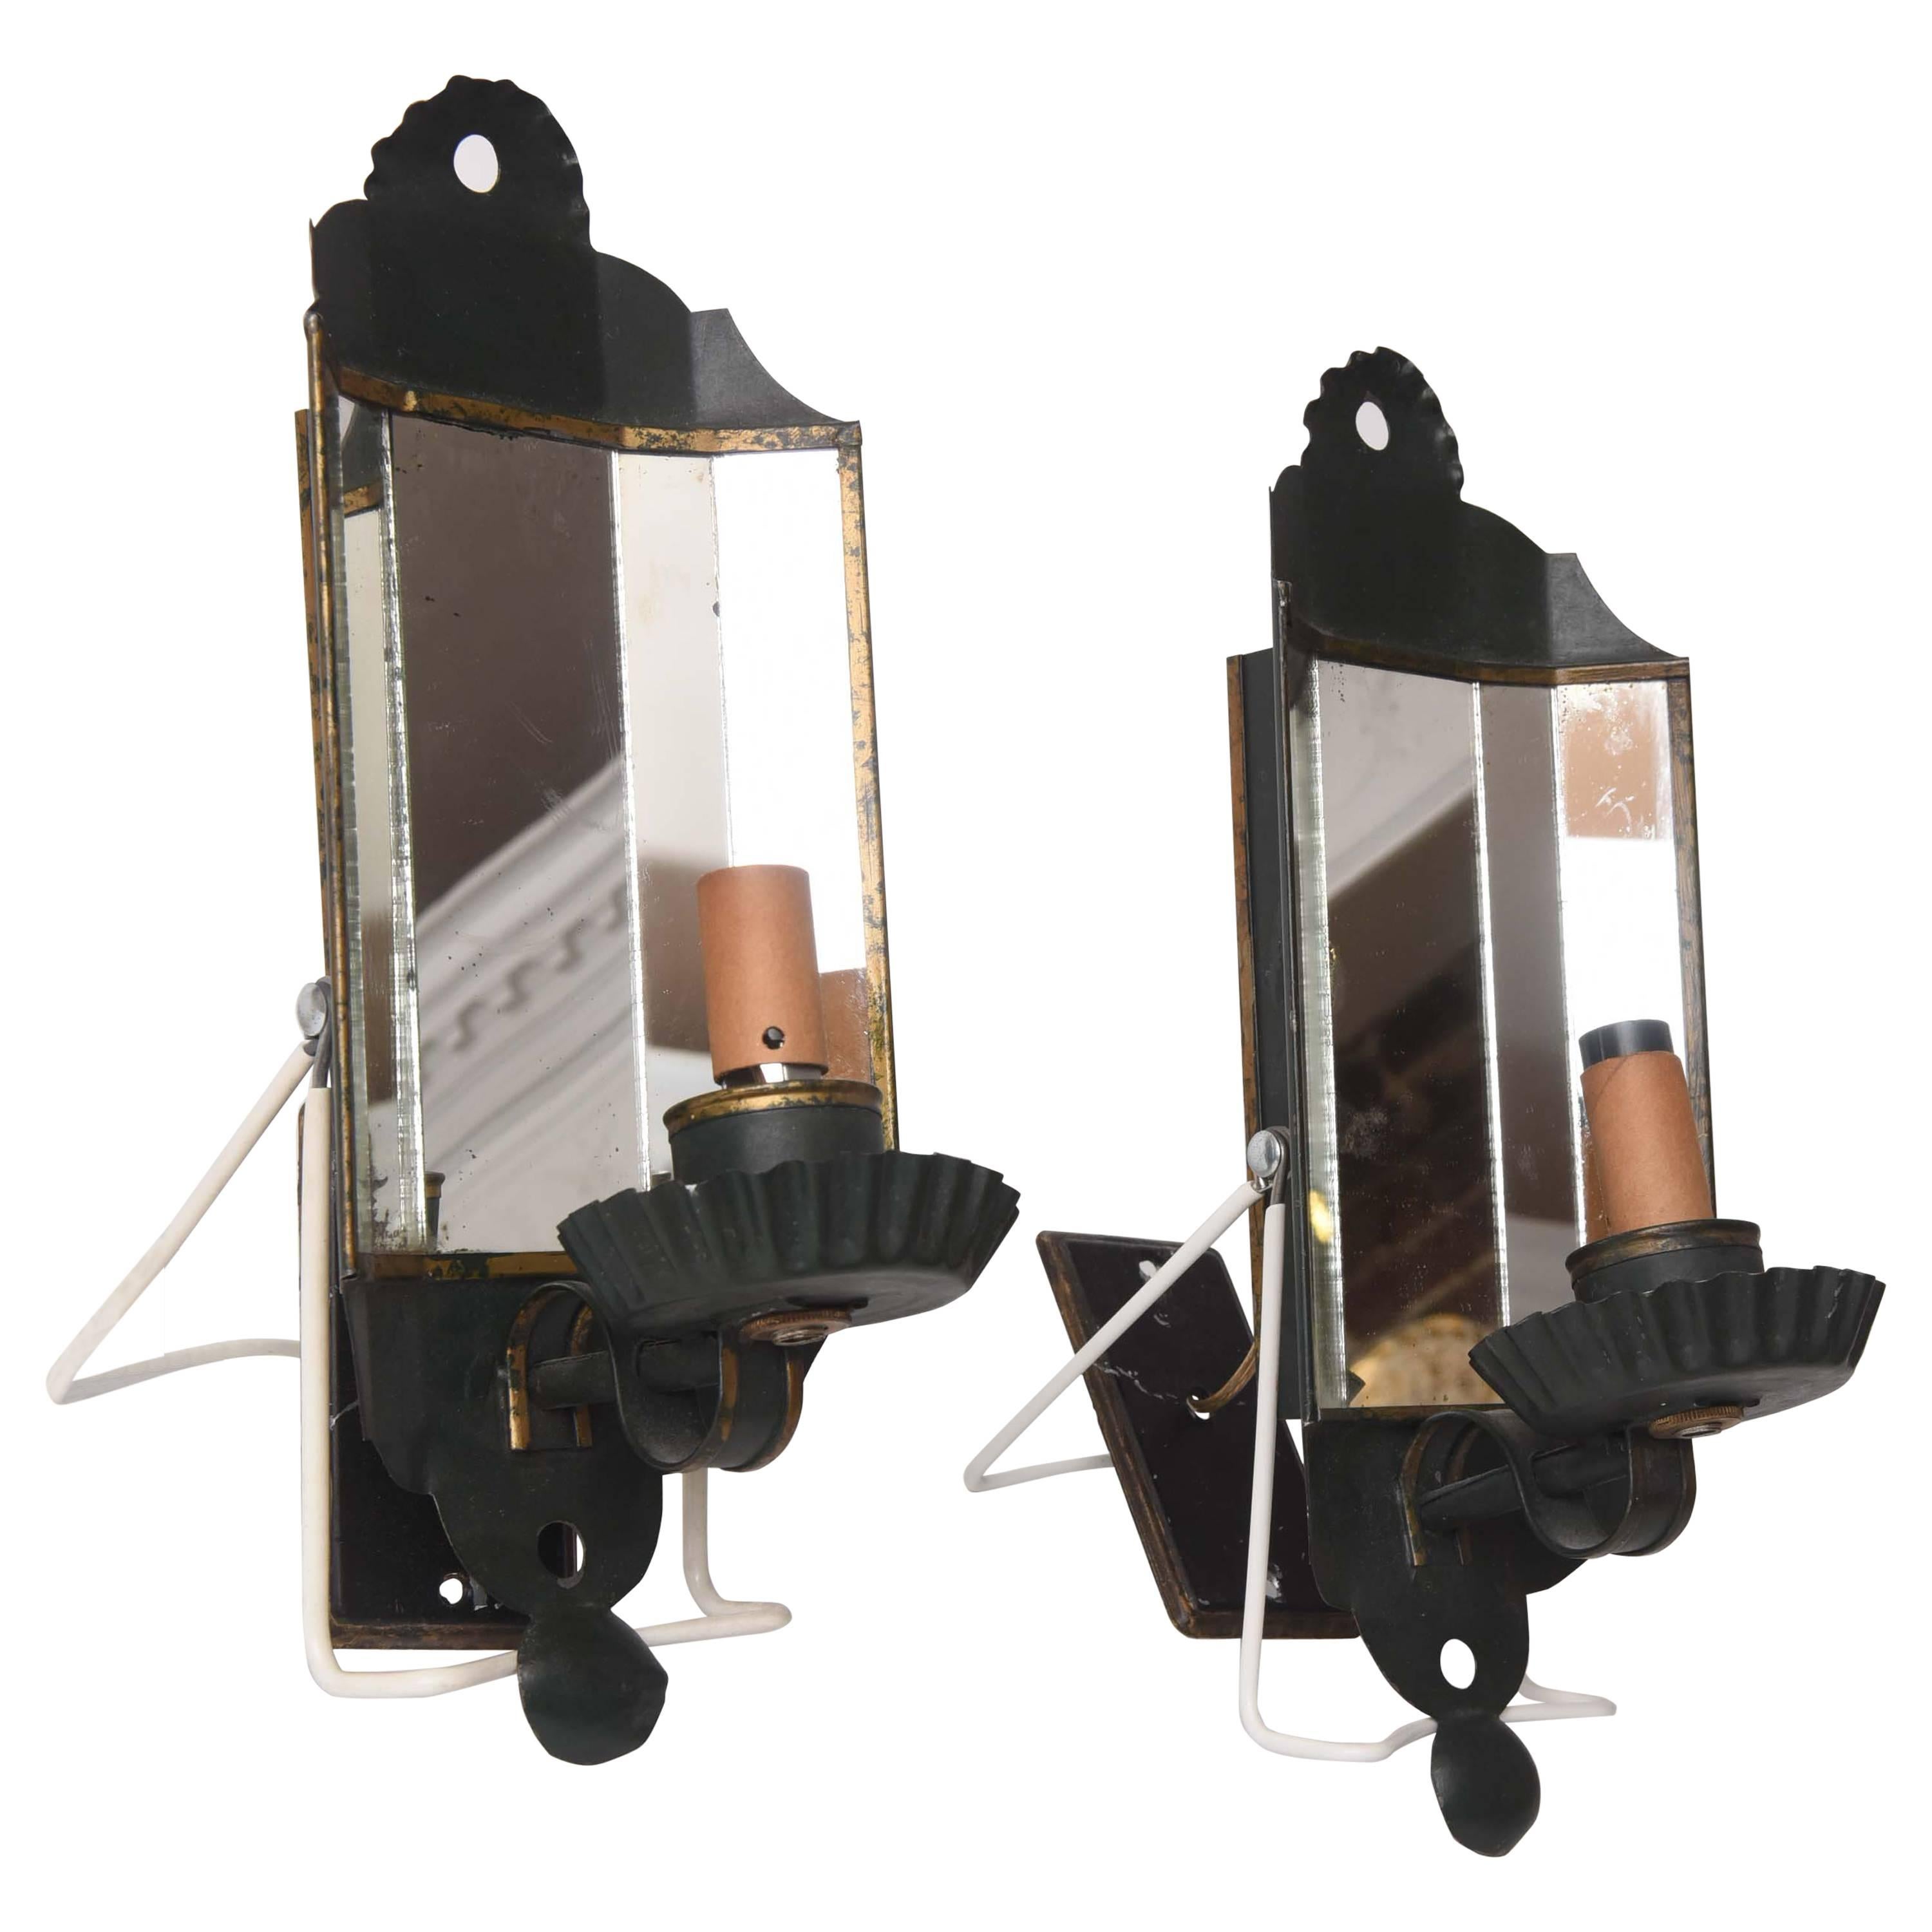 Pair of Vintage Tole Sconces Dark Green/Black Paint, Mirrored, Candleholder Type